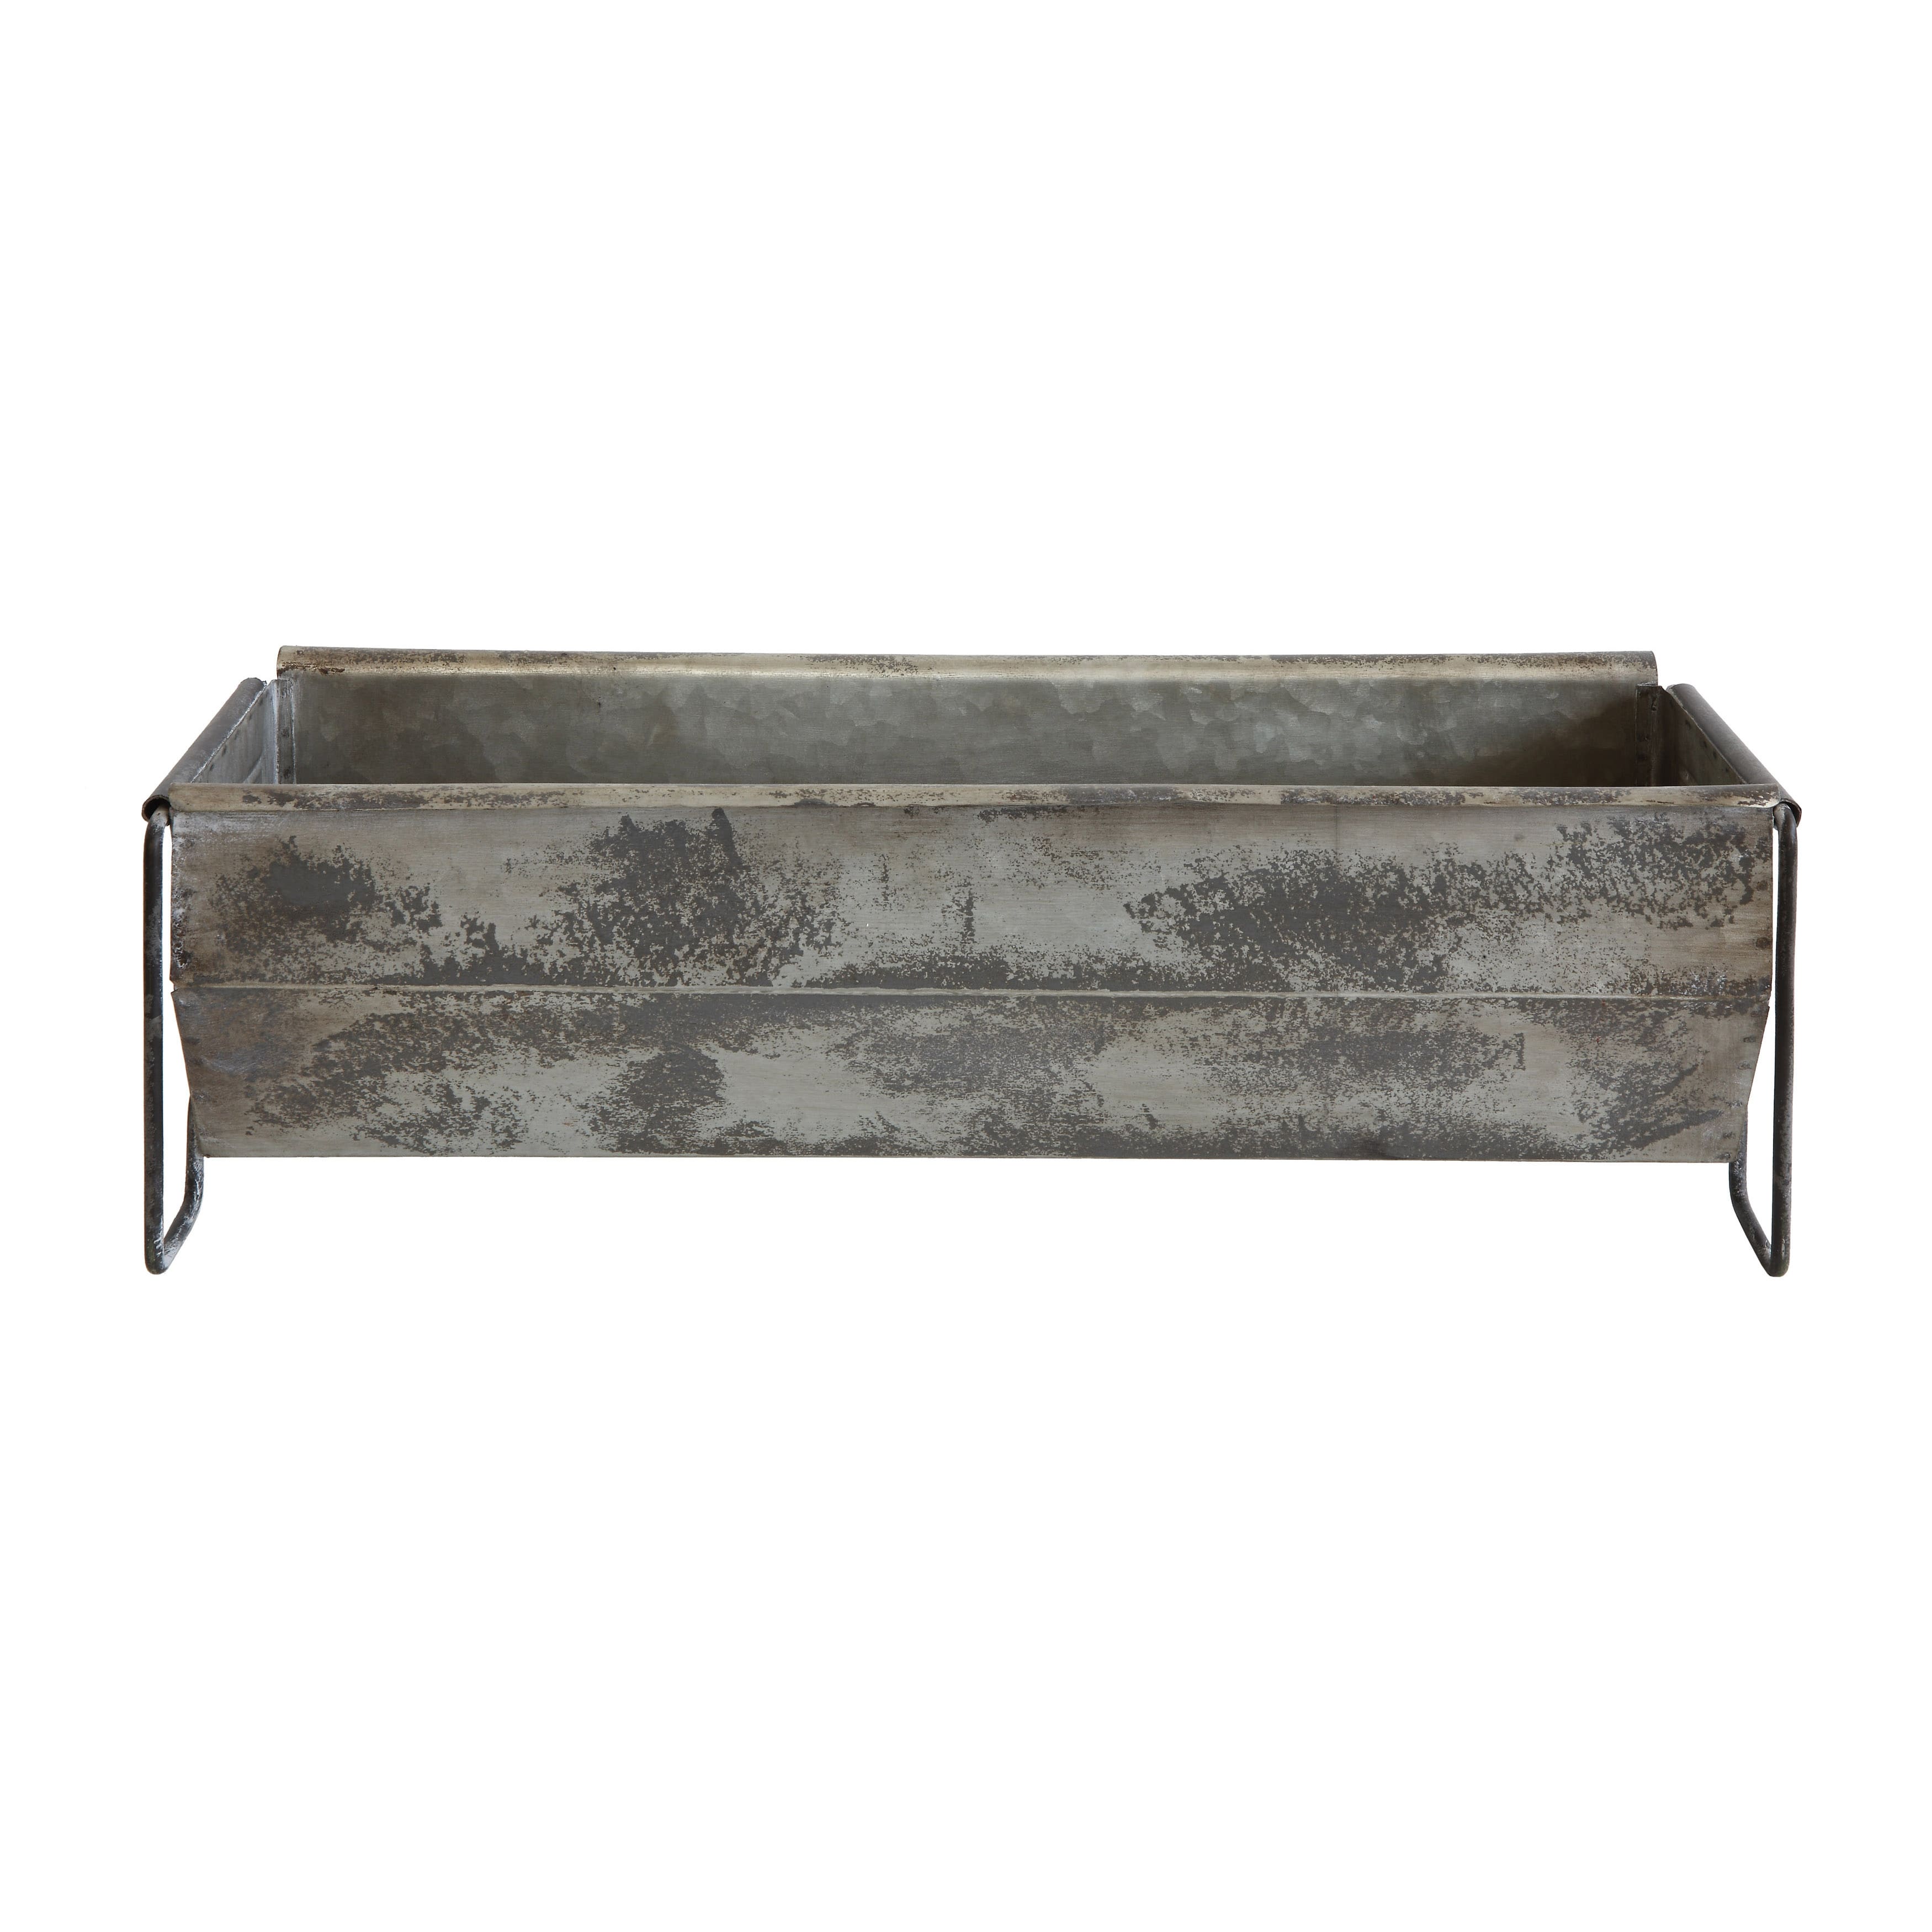 Distressed Metal Trough Container